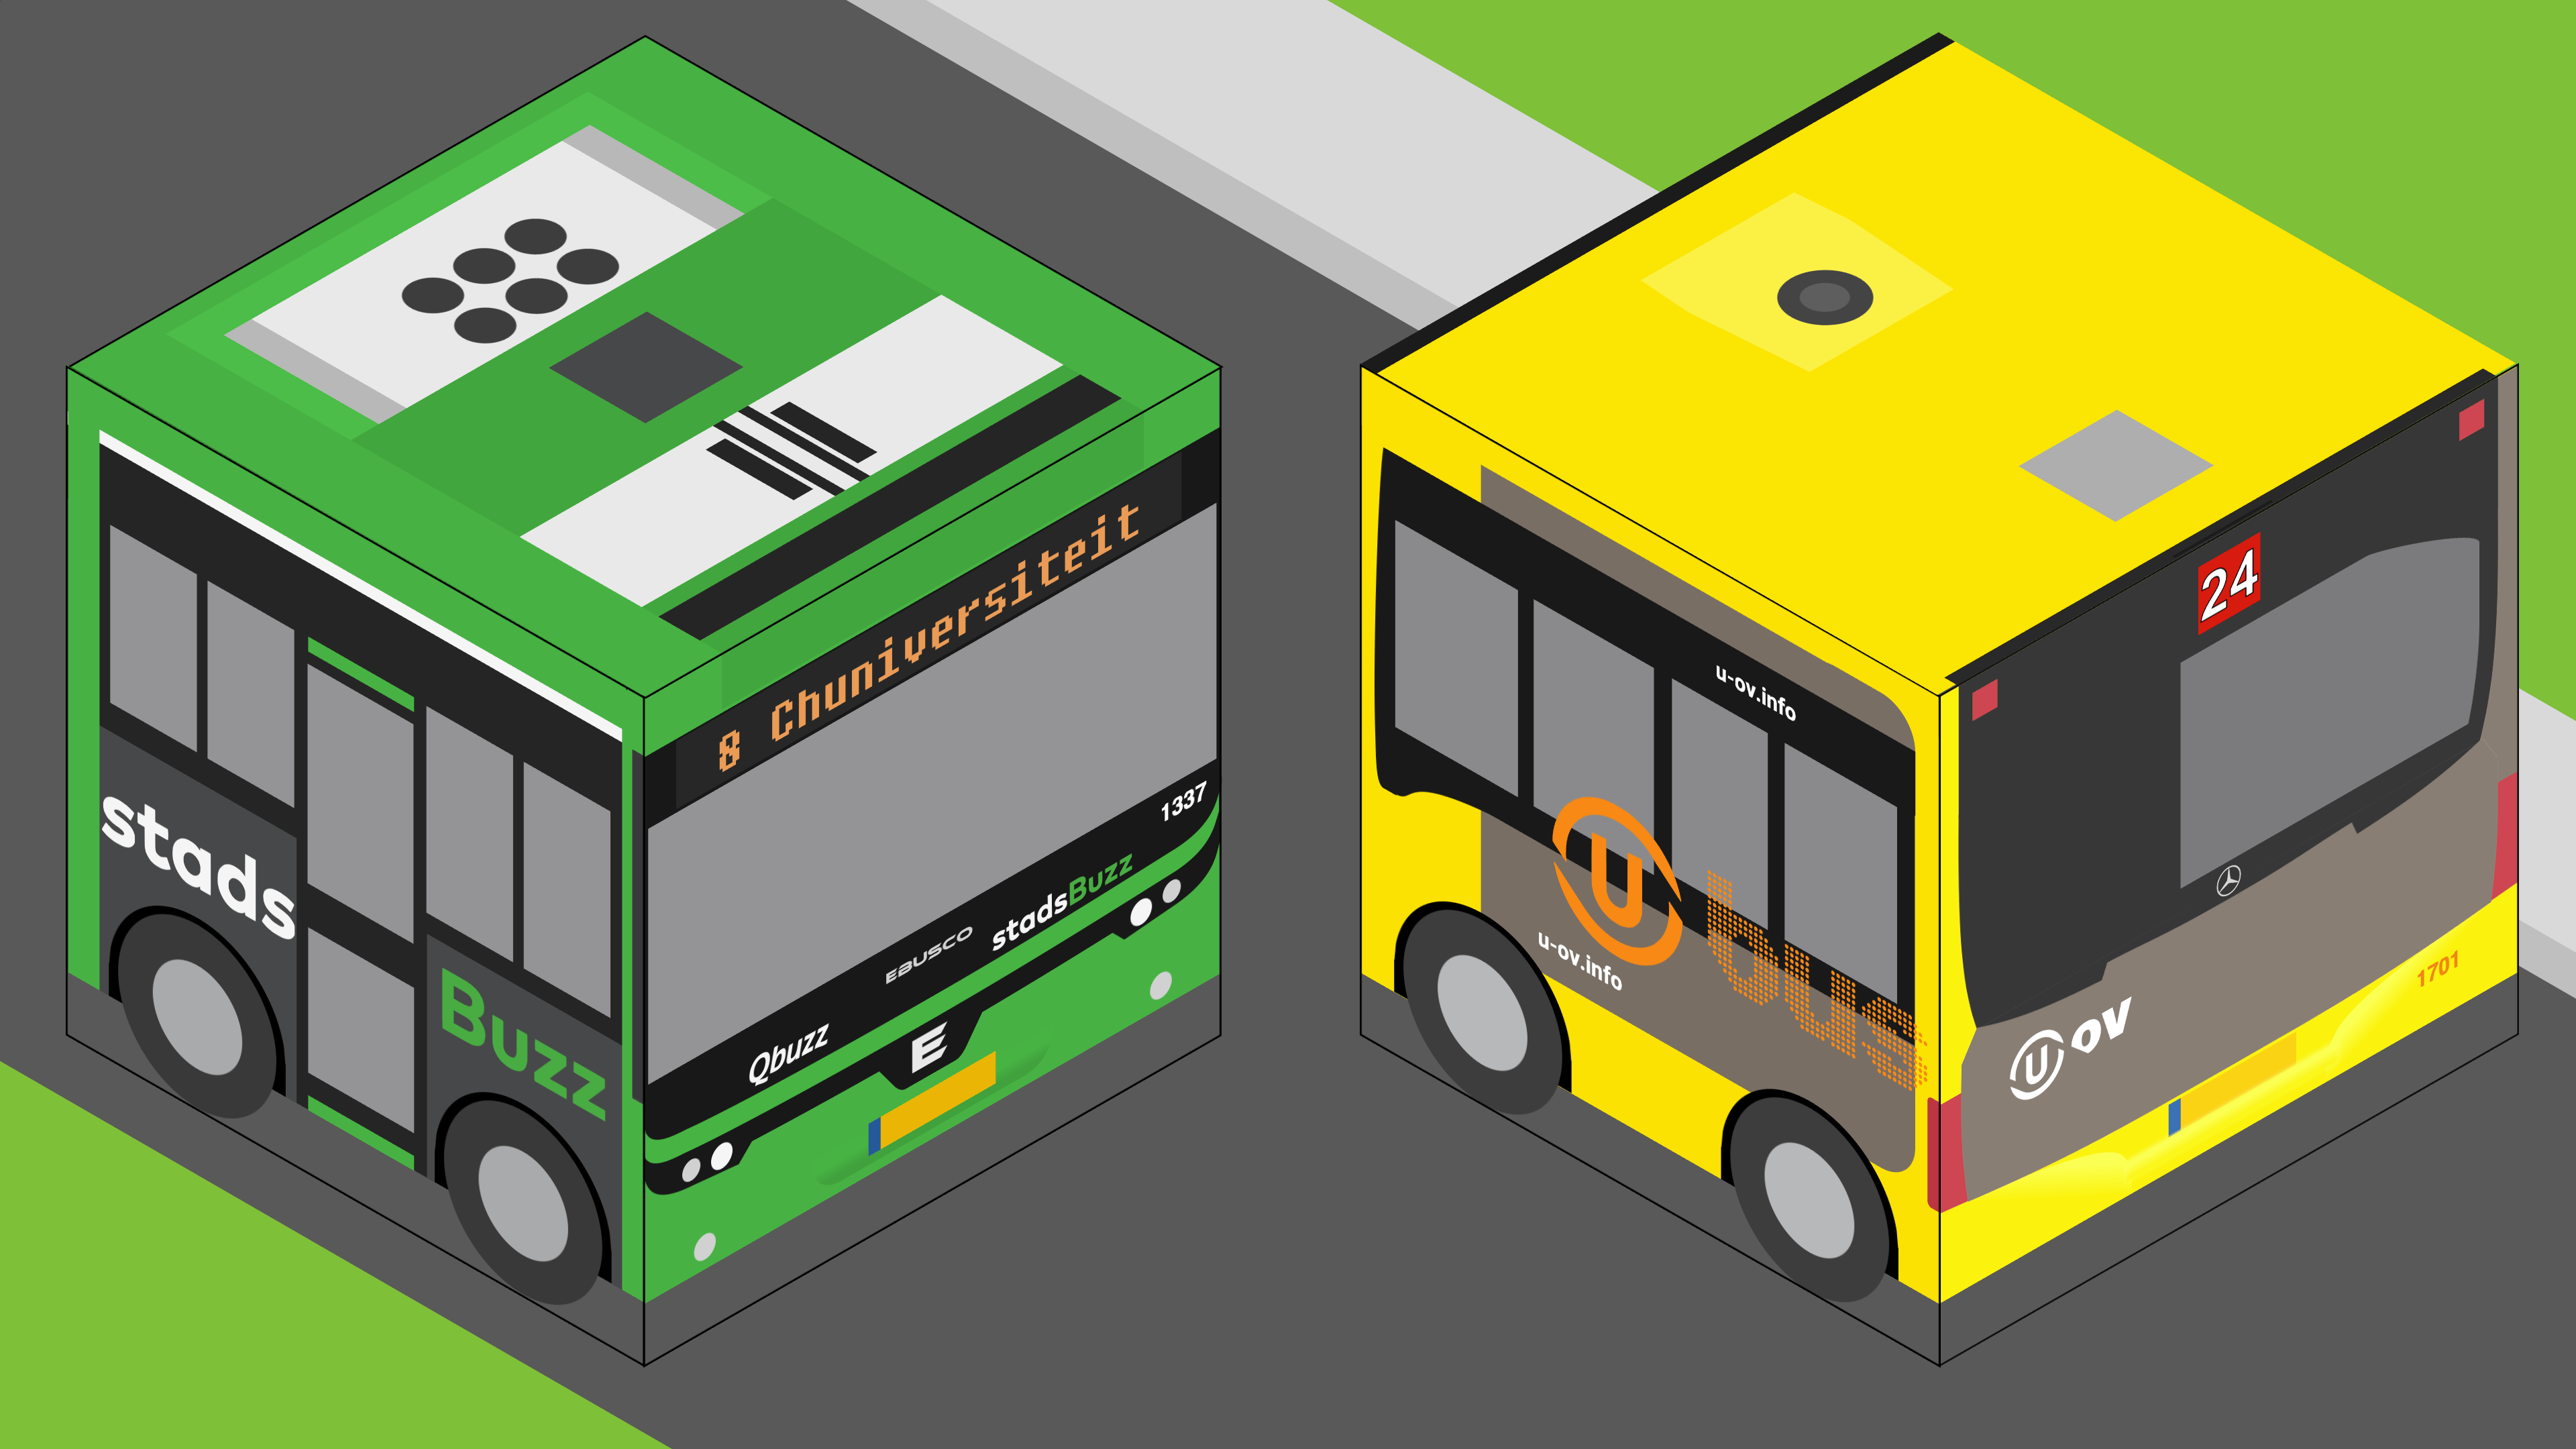 Illustration of two cube-shaped buses